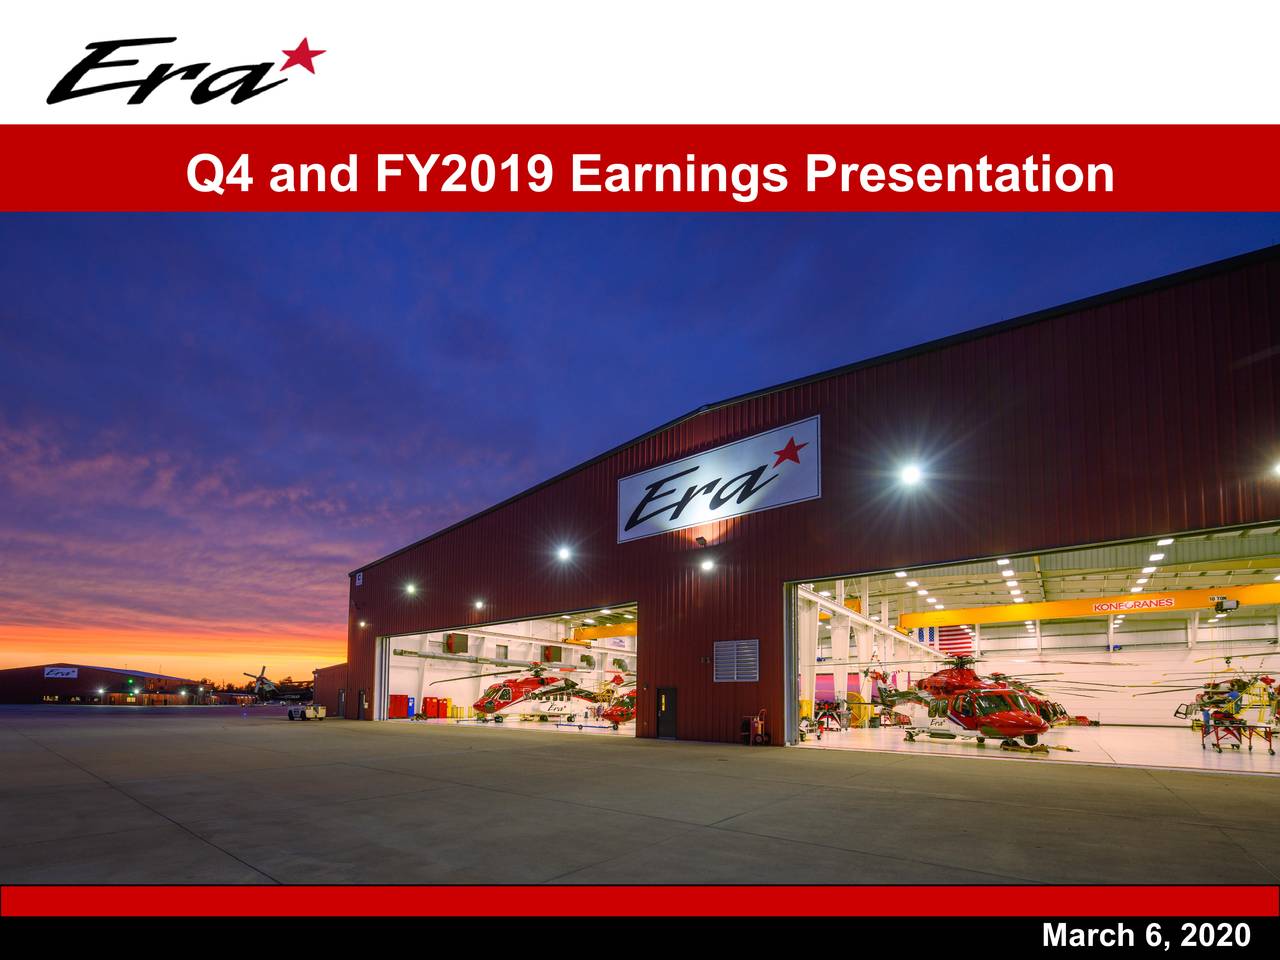 Q4 and FY2019 Earnings Presentation